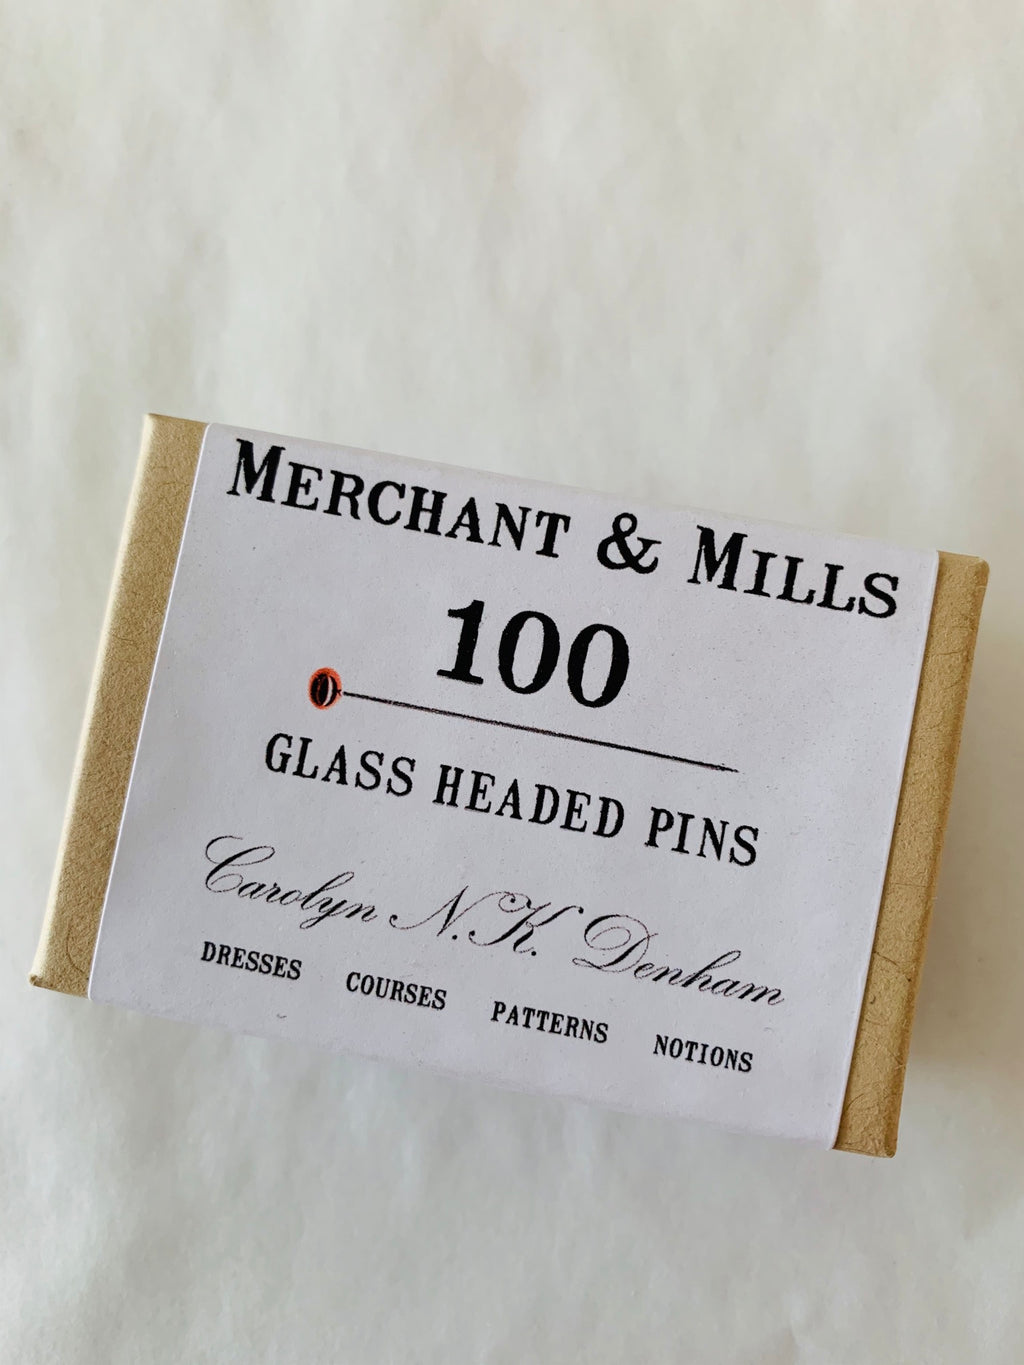 Merchant and Mills 100 Glass Headed Pins